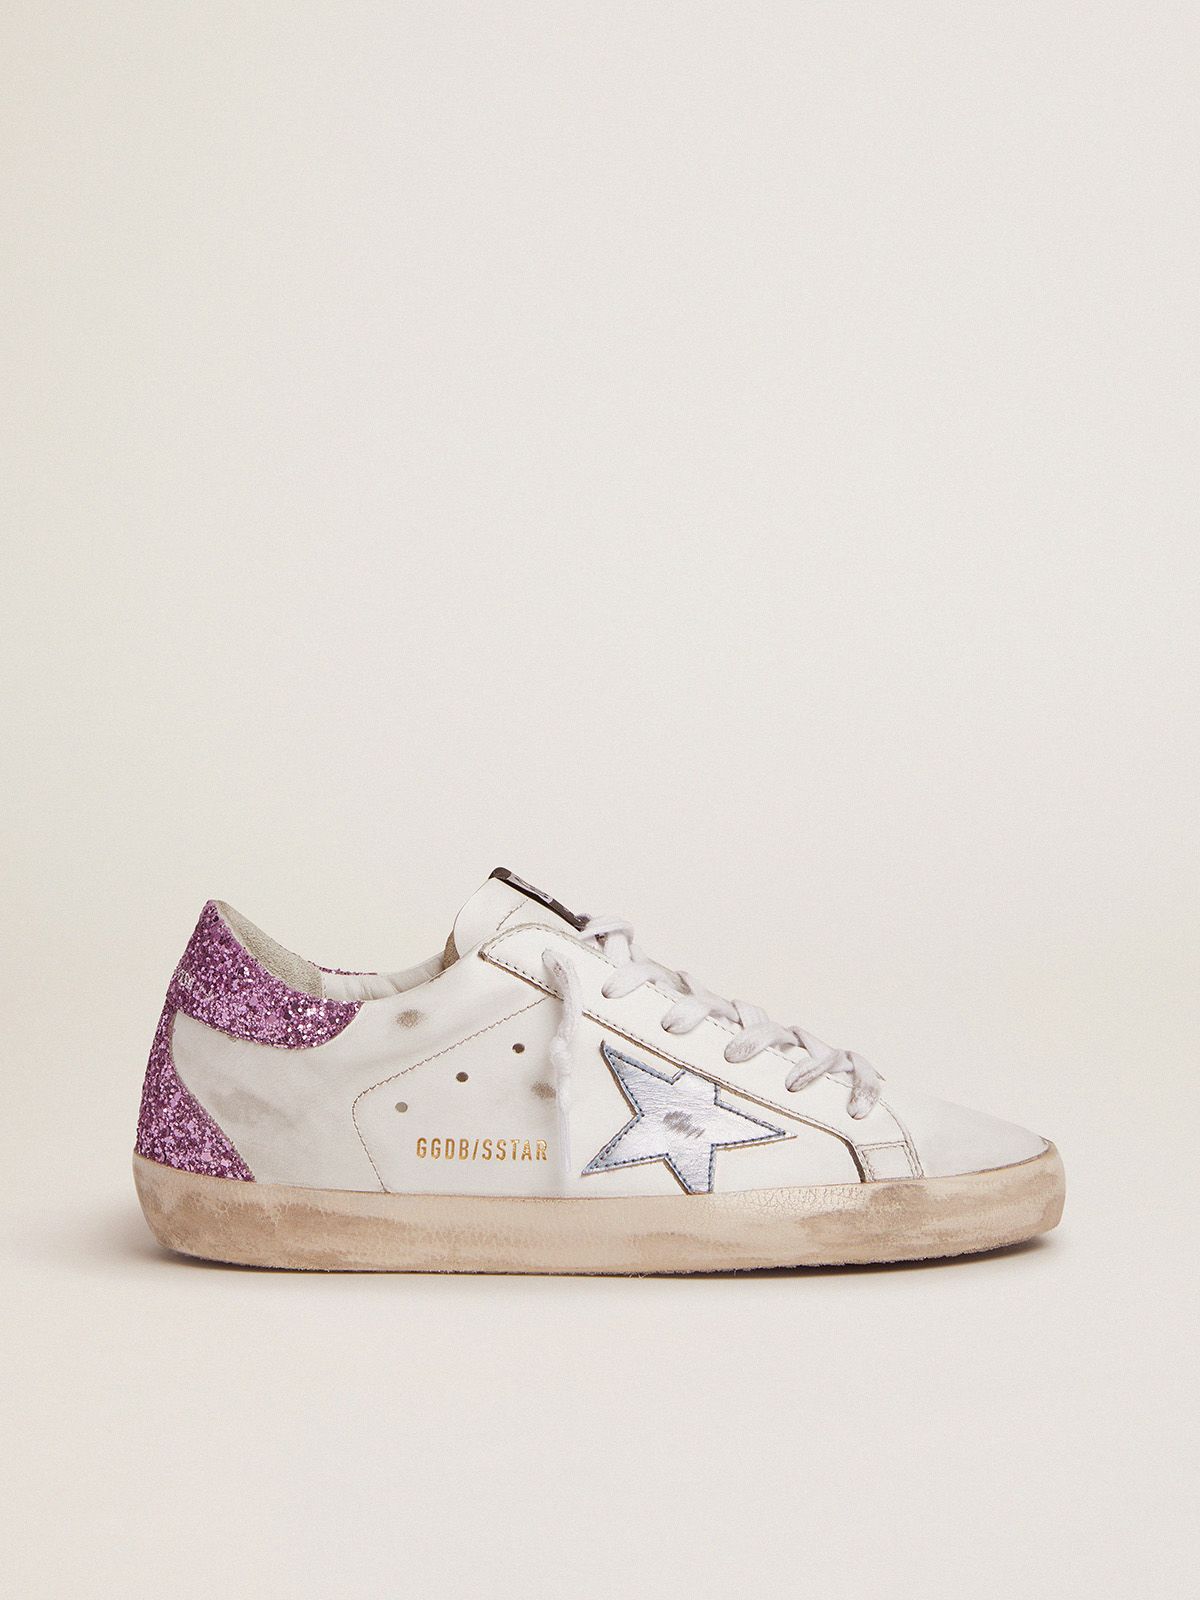 Sneakers Uomo Golden Goose Super-Star sneakers with lavender glitter heel tab and light-blue metallic leather star